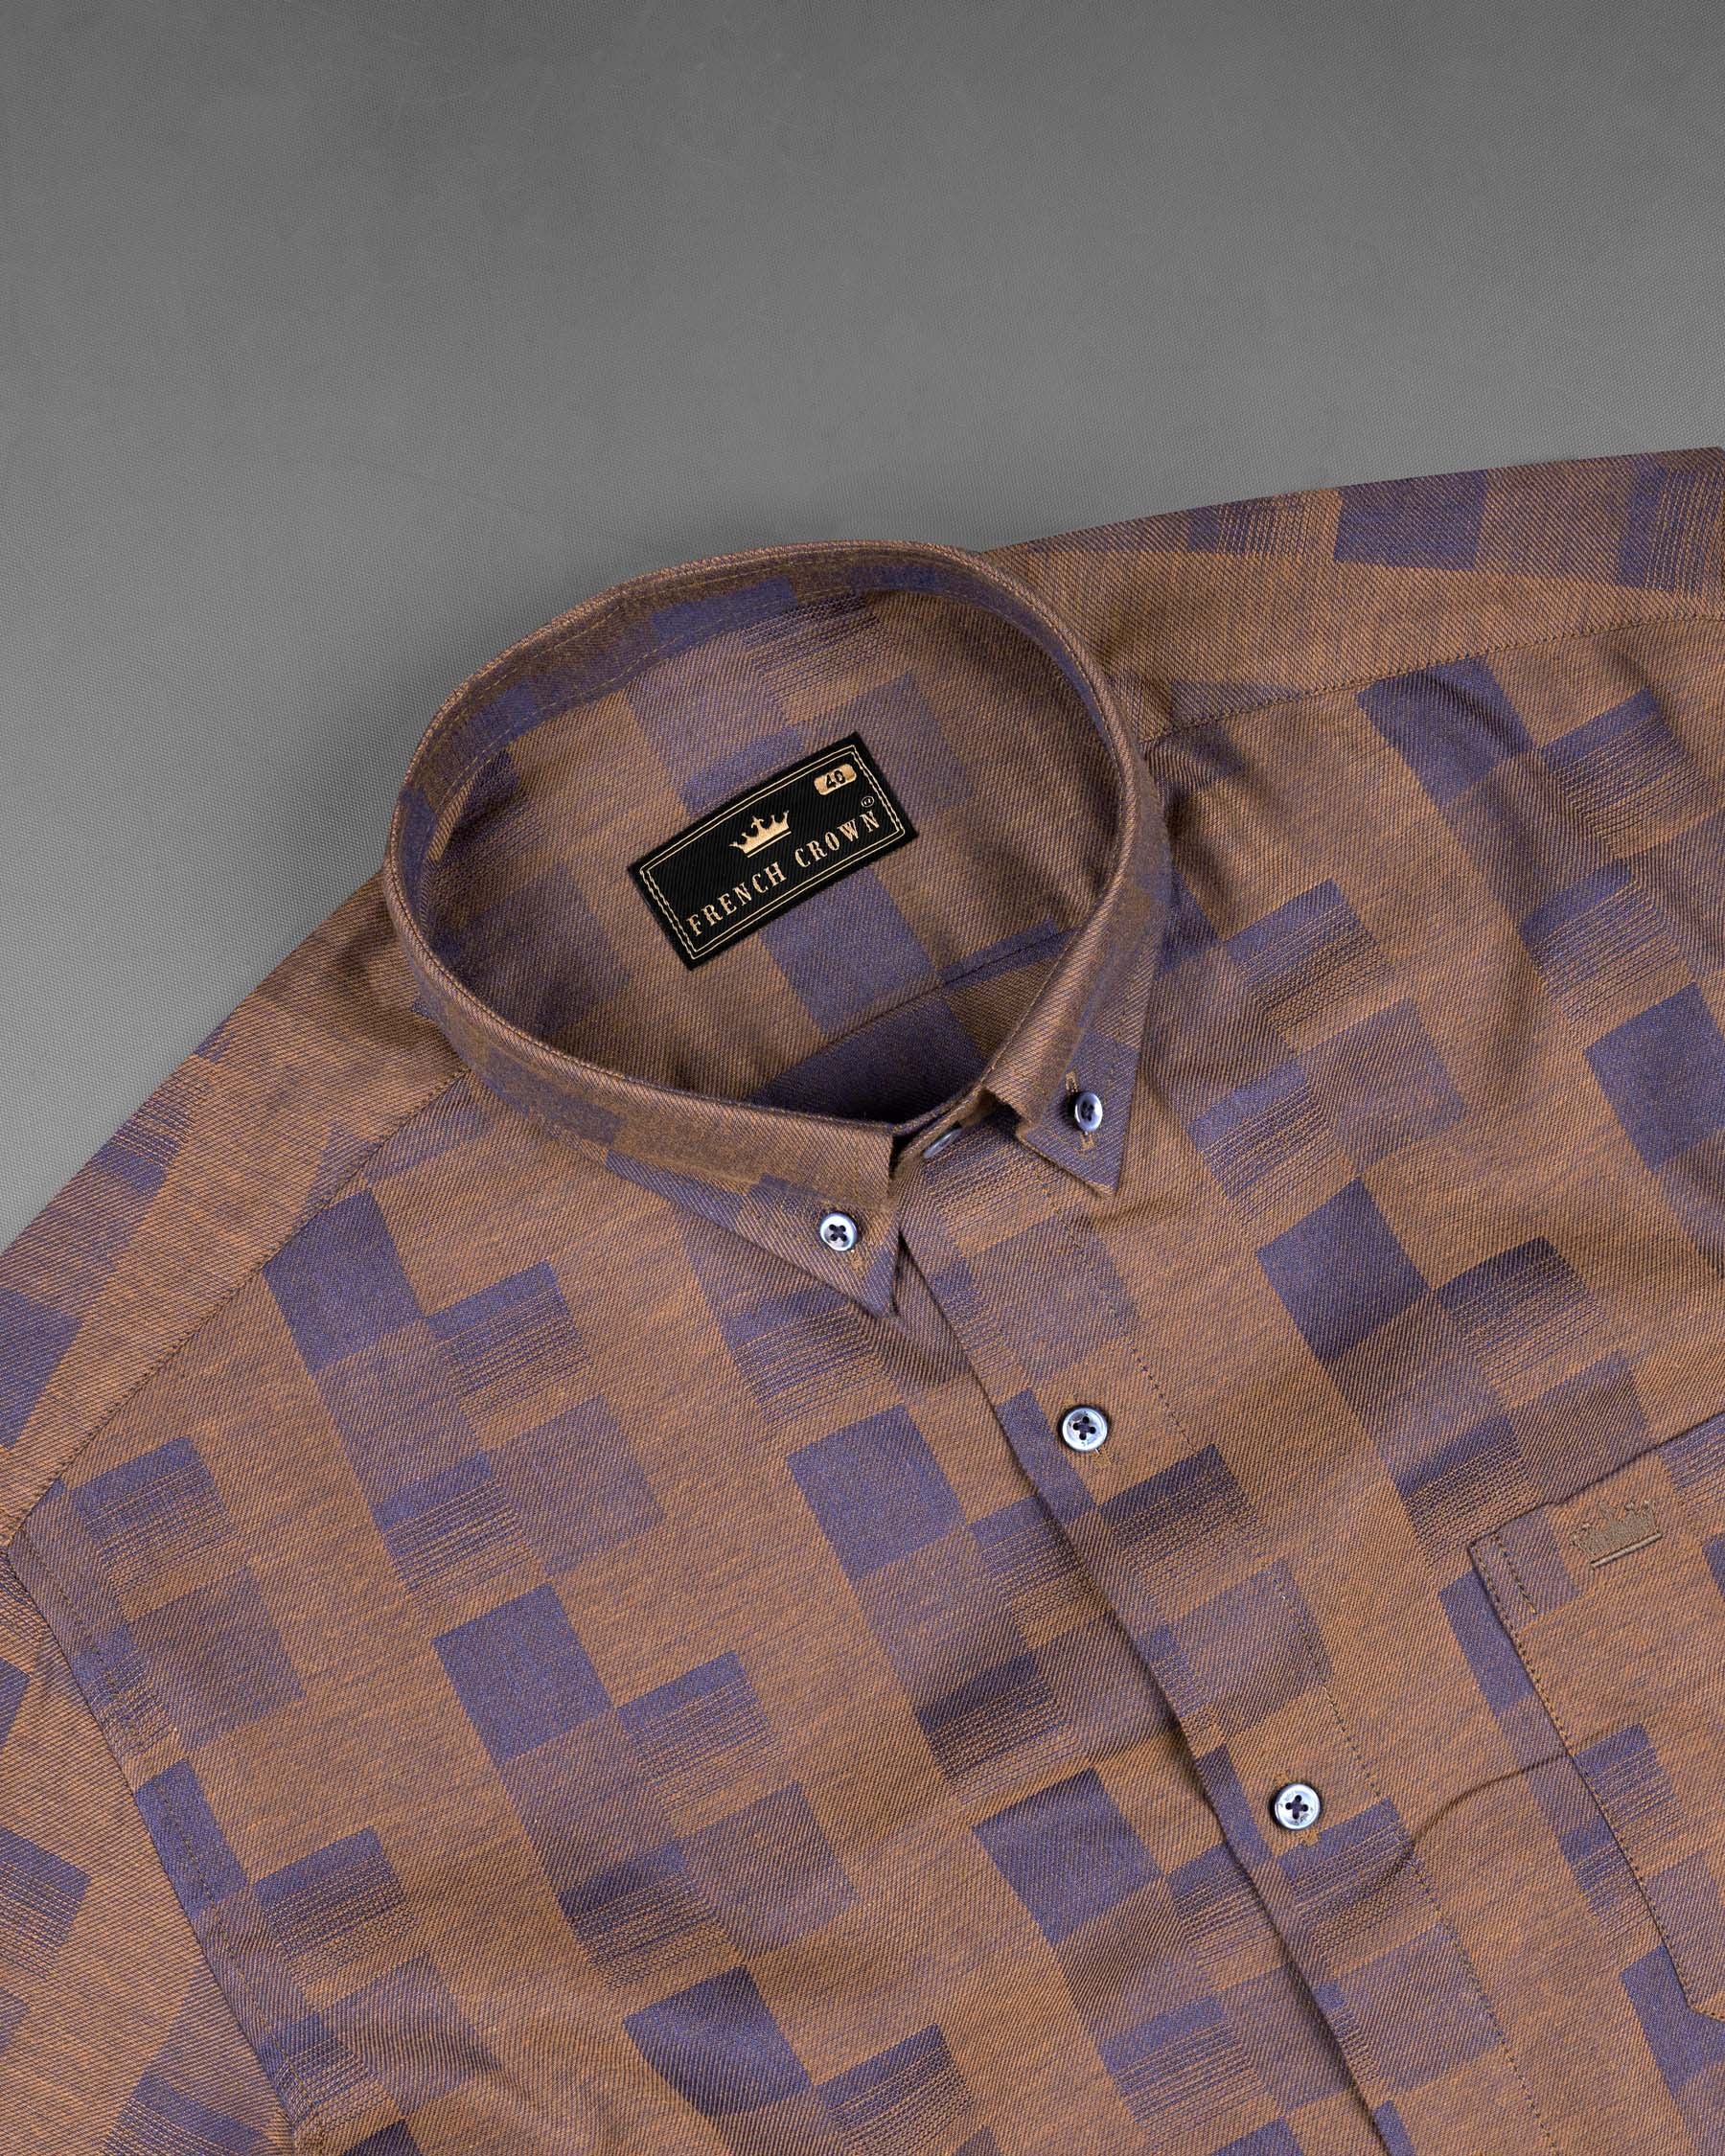 Toast Brown And Gravel Blue Box Textured Twill Premium Cotton Shirt 7091-BD-BLE-38,7091-BD-BLE-38,7091-BD-BLE-39,7091-BD-BLE-39,7091-BD-BLE-40,7091-BD-BLE-40,7091-BD-BLE-42,7091-BD-BLE-42,7091-BD-BLE-44,7091-BD-BLE-44,7091-BD-BLE-46,7091-BD-BLE-46,7091-BD-BLE-48,7091-BD-BLE-48,7091-BD-BLE-50,7091-BD-BLE-50,7091-BD-BLE-52,7091-BD-BLE-52